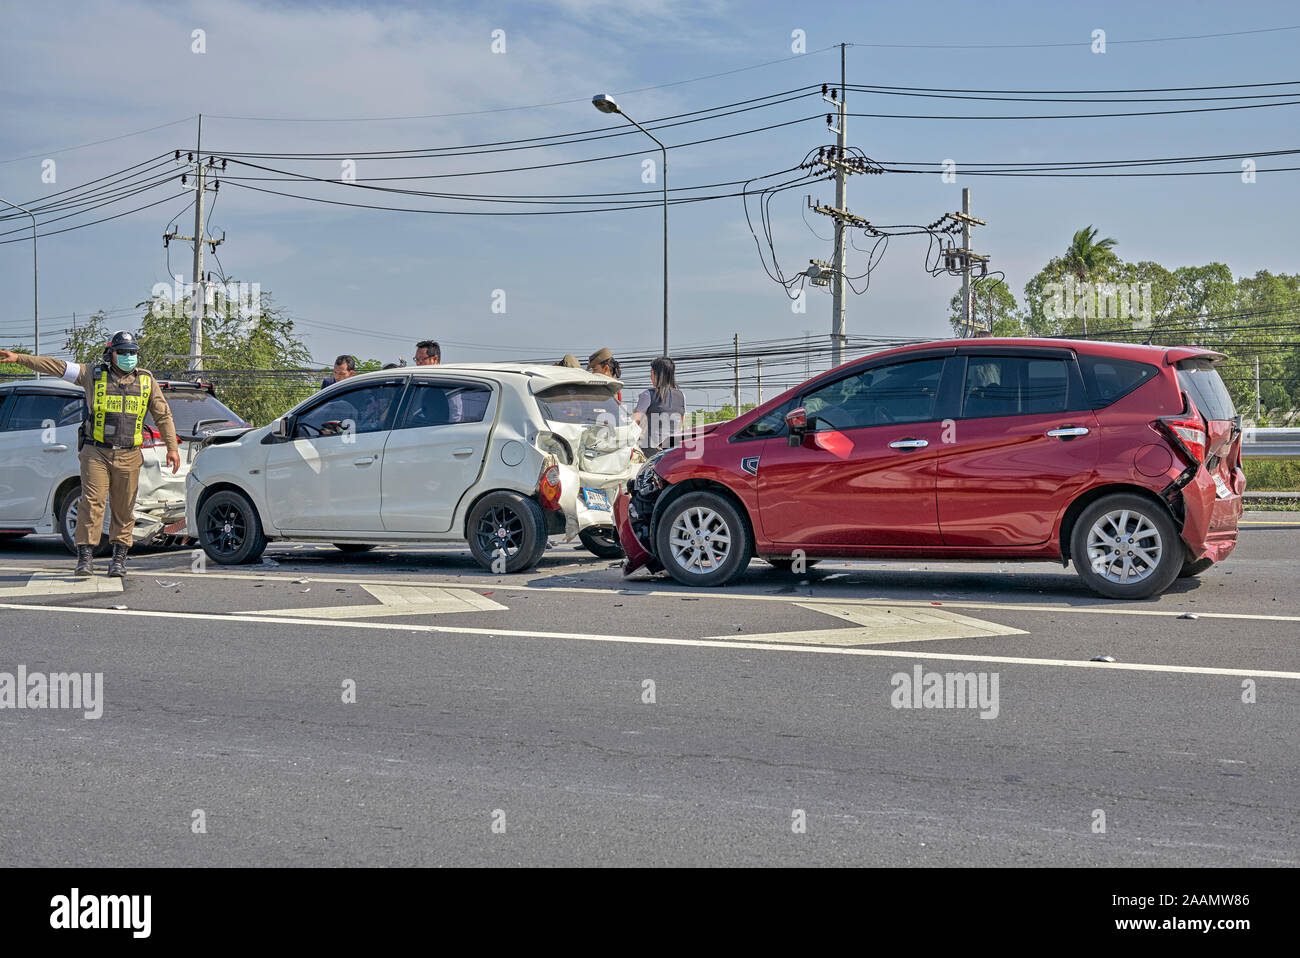 Car accident, driving to close, failure to stop, vehicle collision, Multi car collision, Thailand, Southeast Asia, front and rear damage Stock Photo